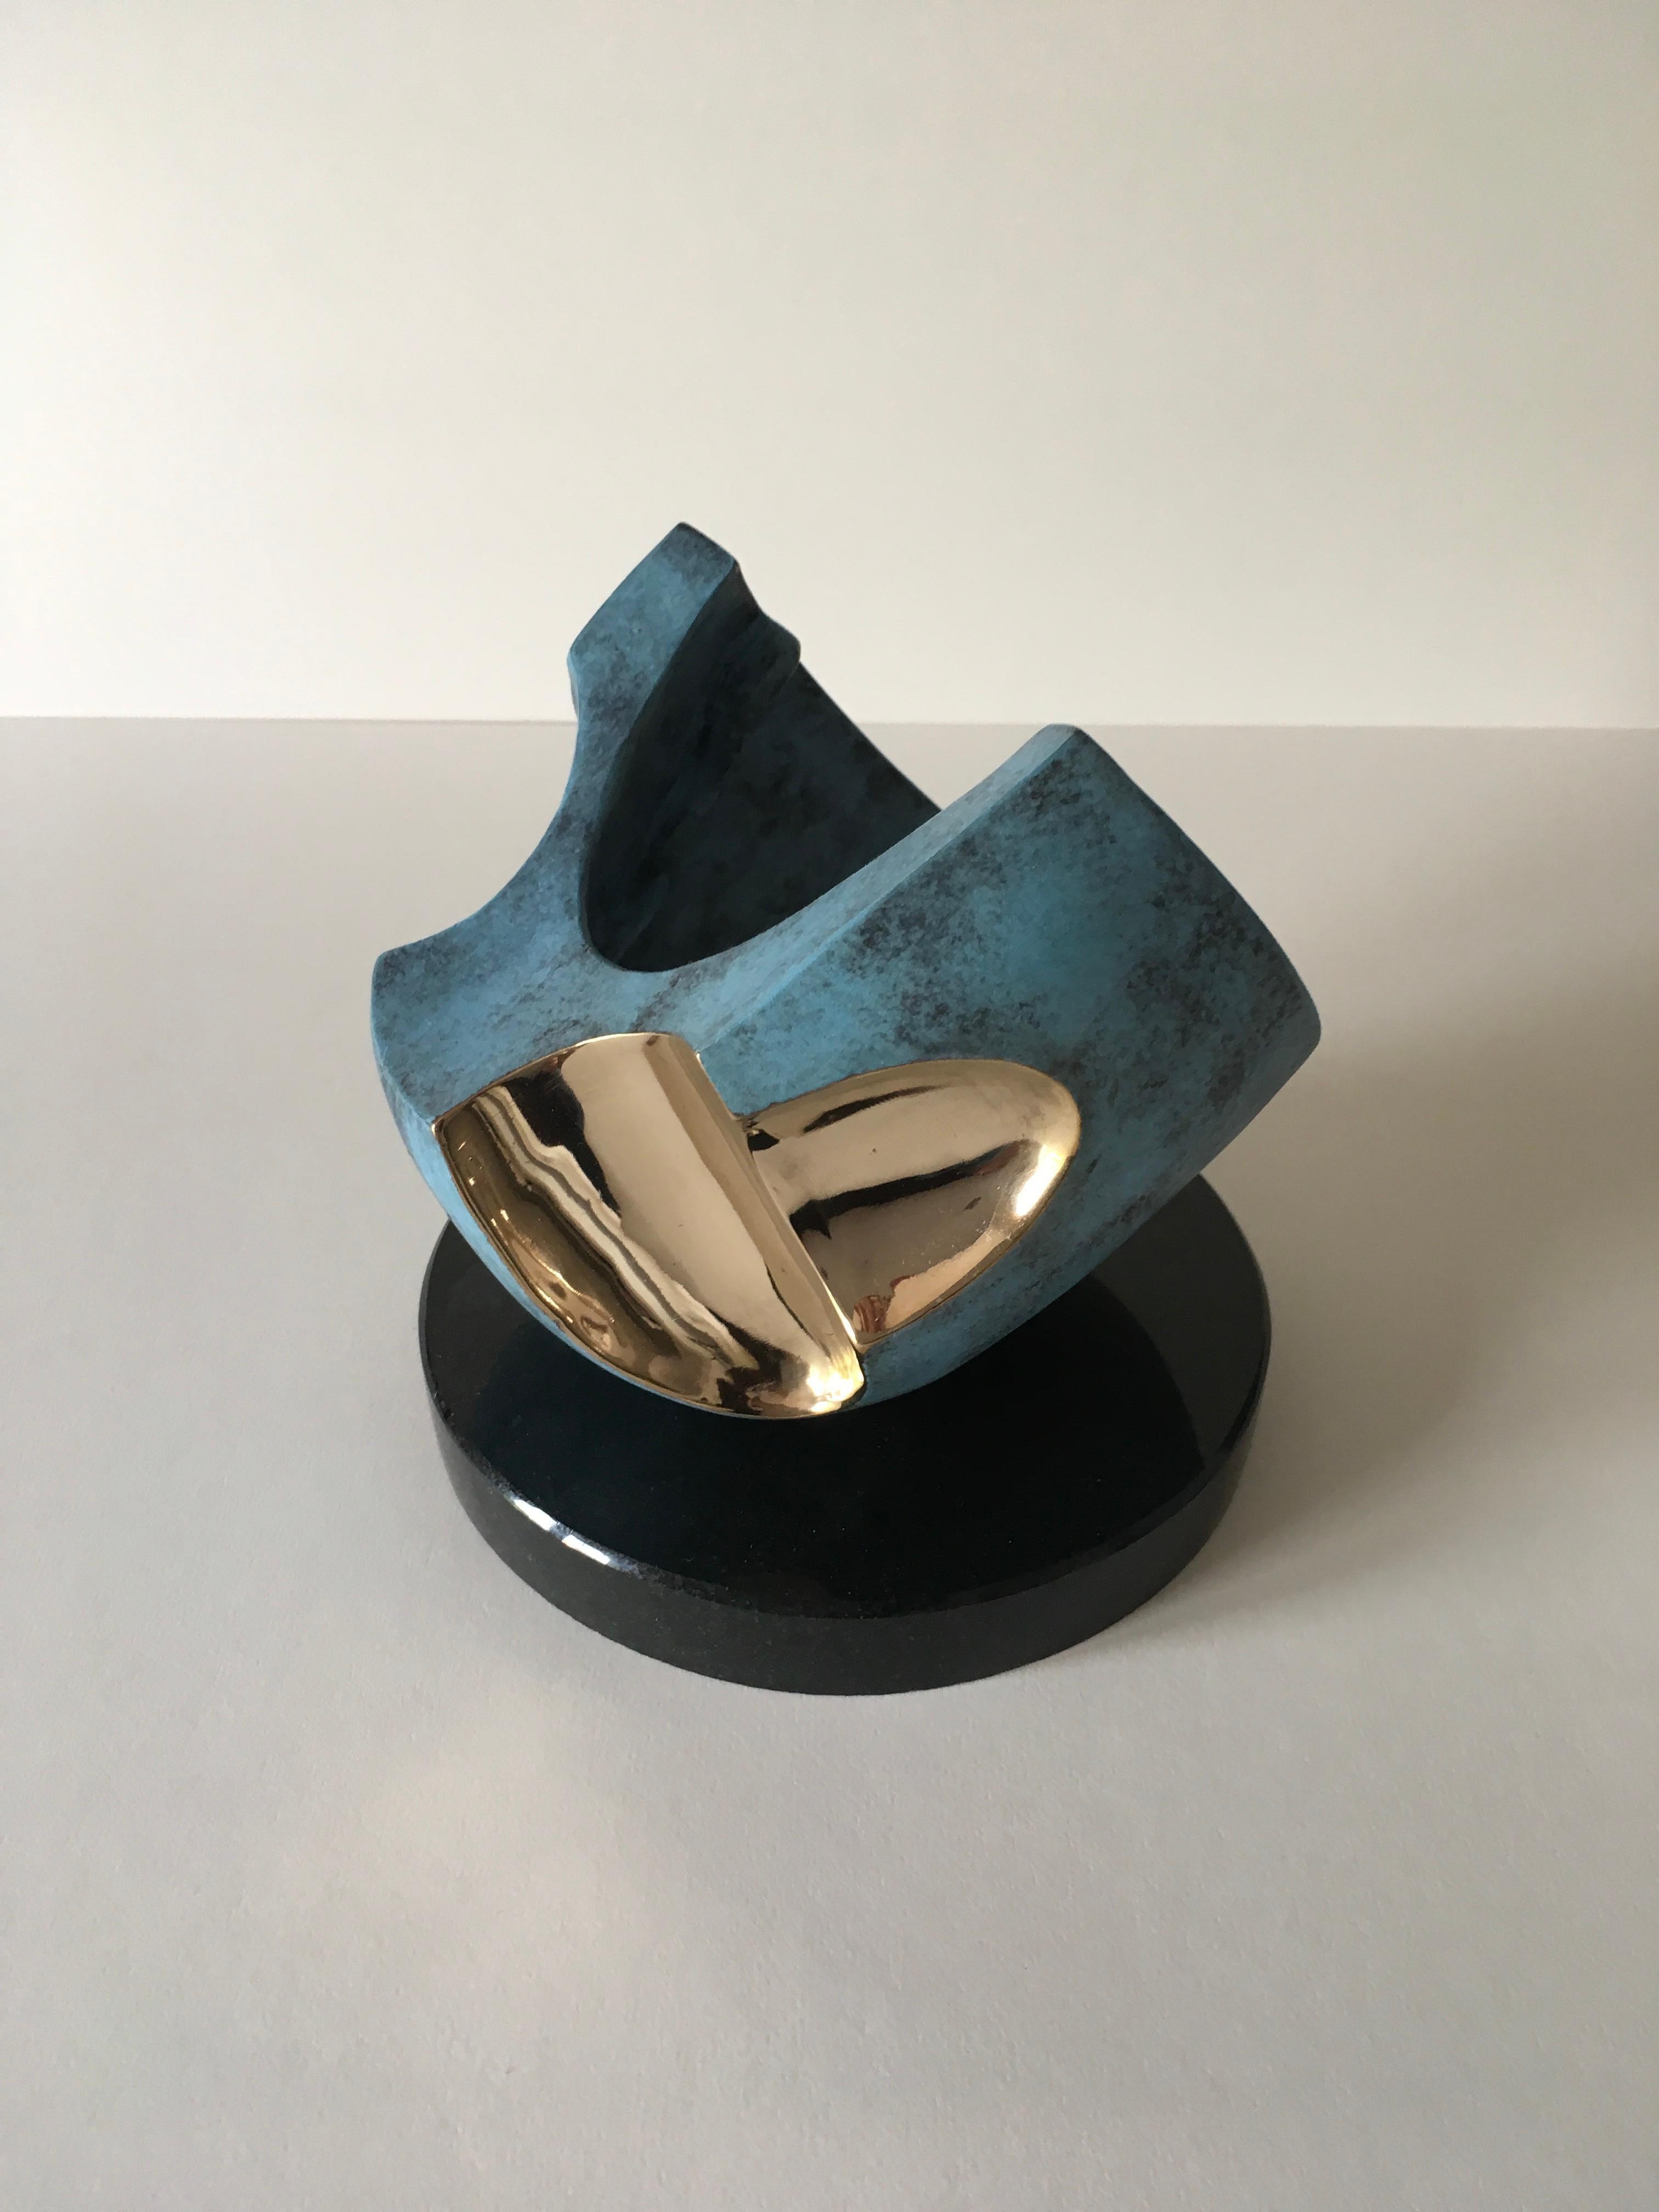 David Sprakes Figurative Sculpture - Cupped Hollow  - Tabletop limited edition sculpture Bronze 